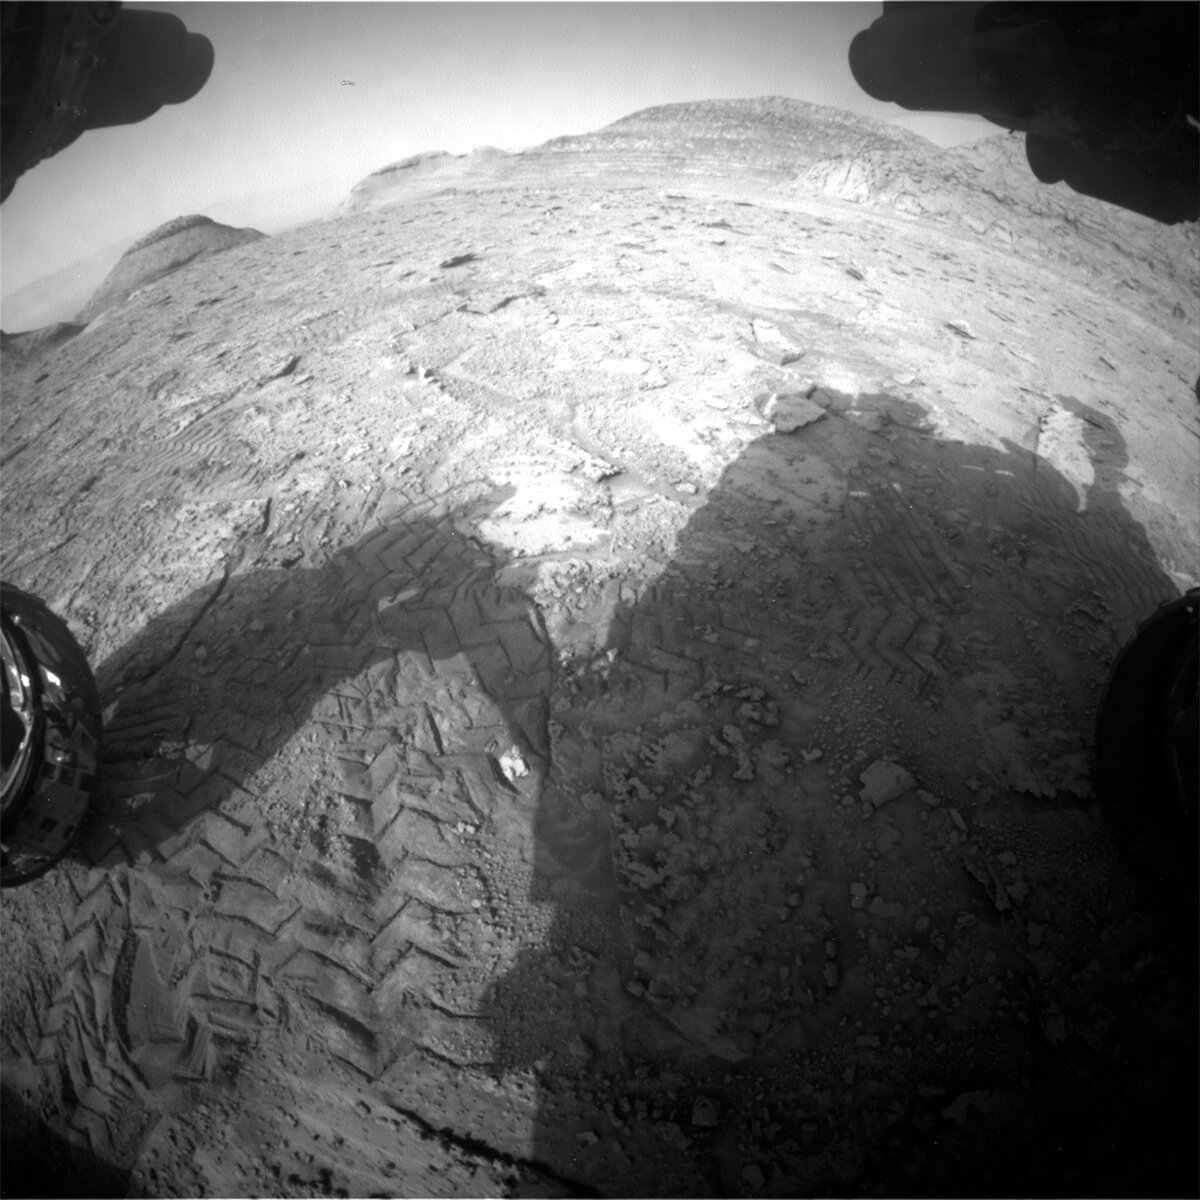 This image of the Curiosity rover's shadow over the Mars surface was taken by Front Hazard Avoidance Camera (Front Hazcam) onboard NASA's Mars rover Curiosity on Sol 3735.